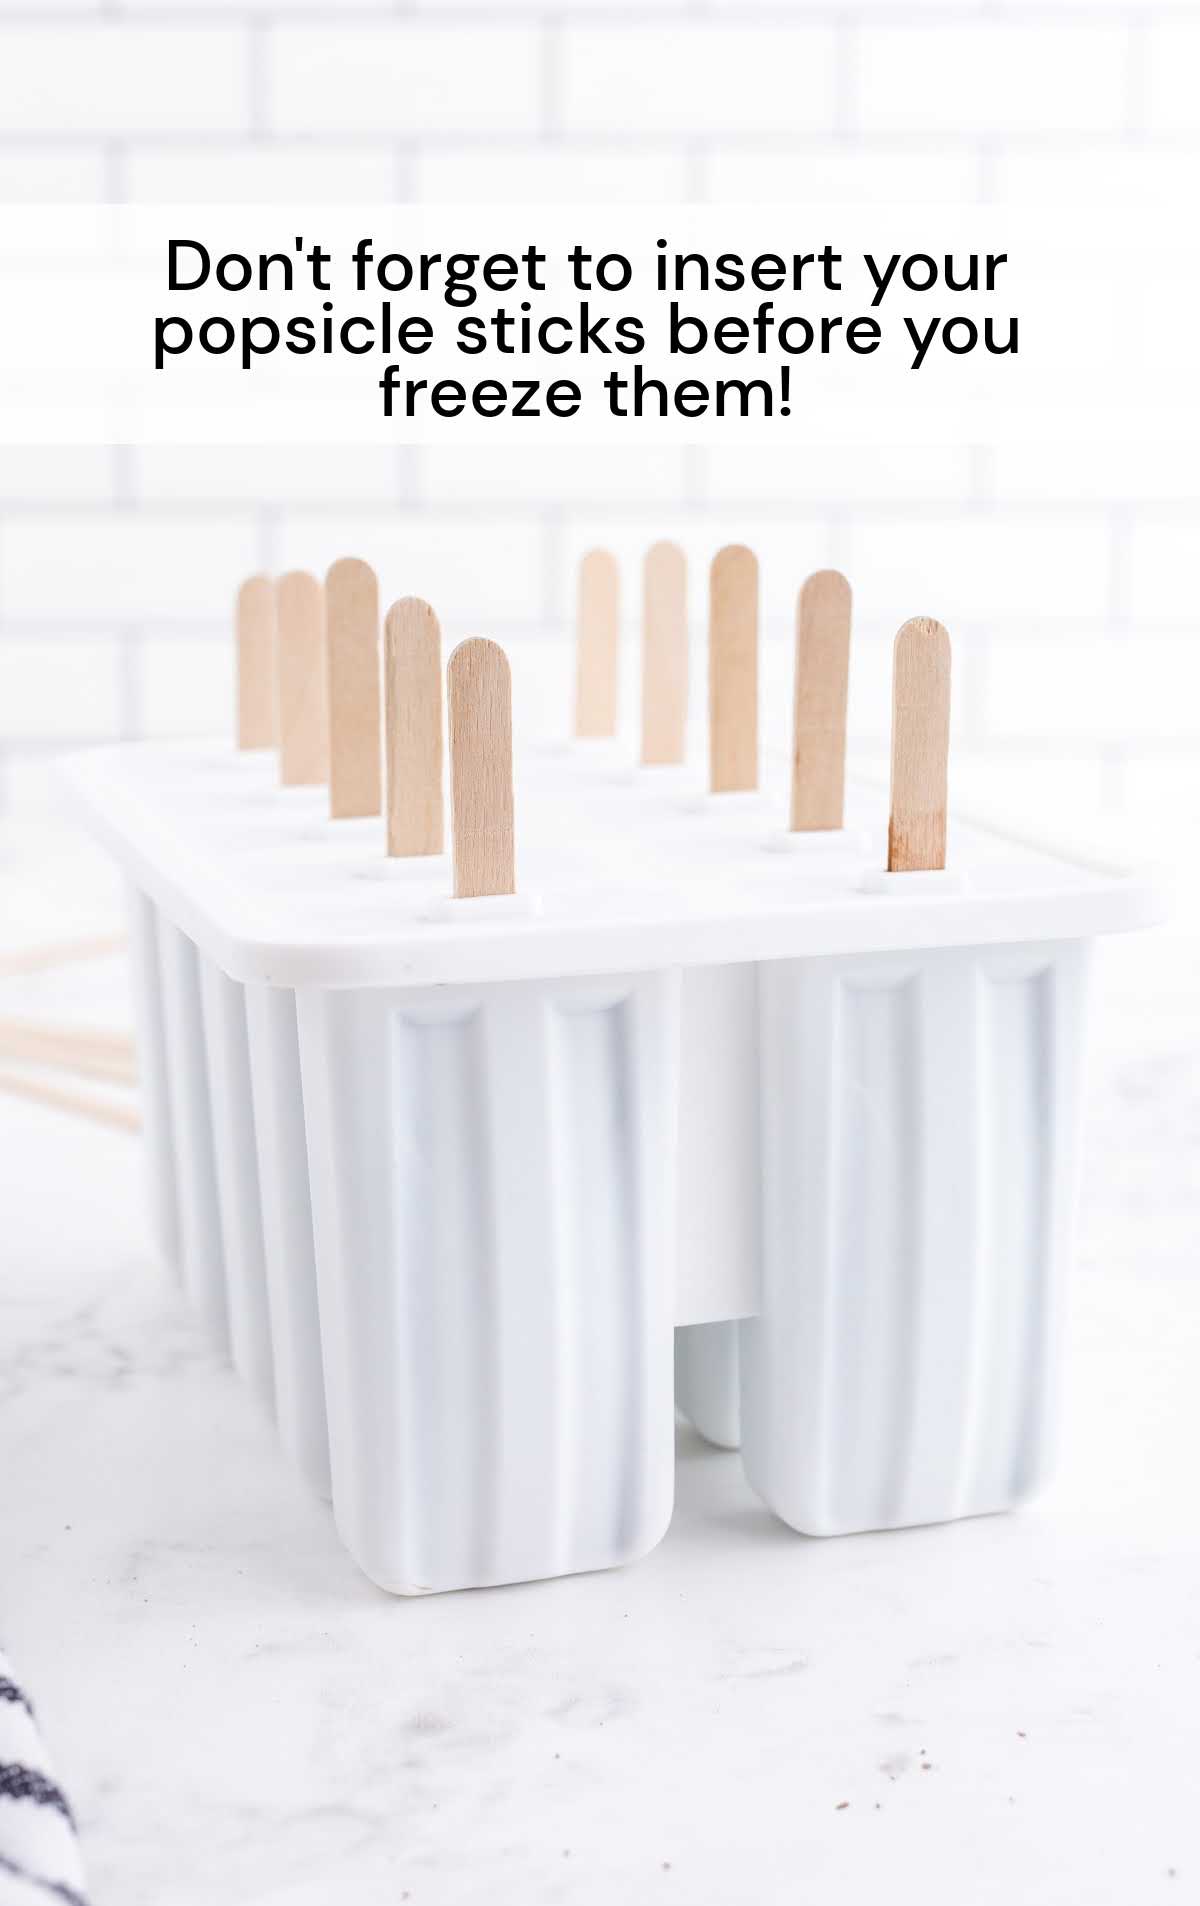 popsicle sticks inserted into the popsicle mold